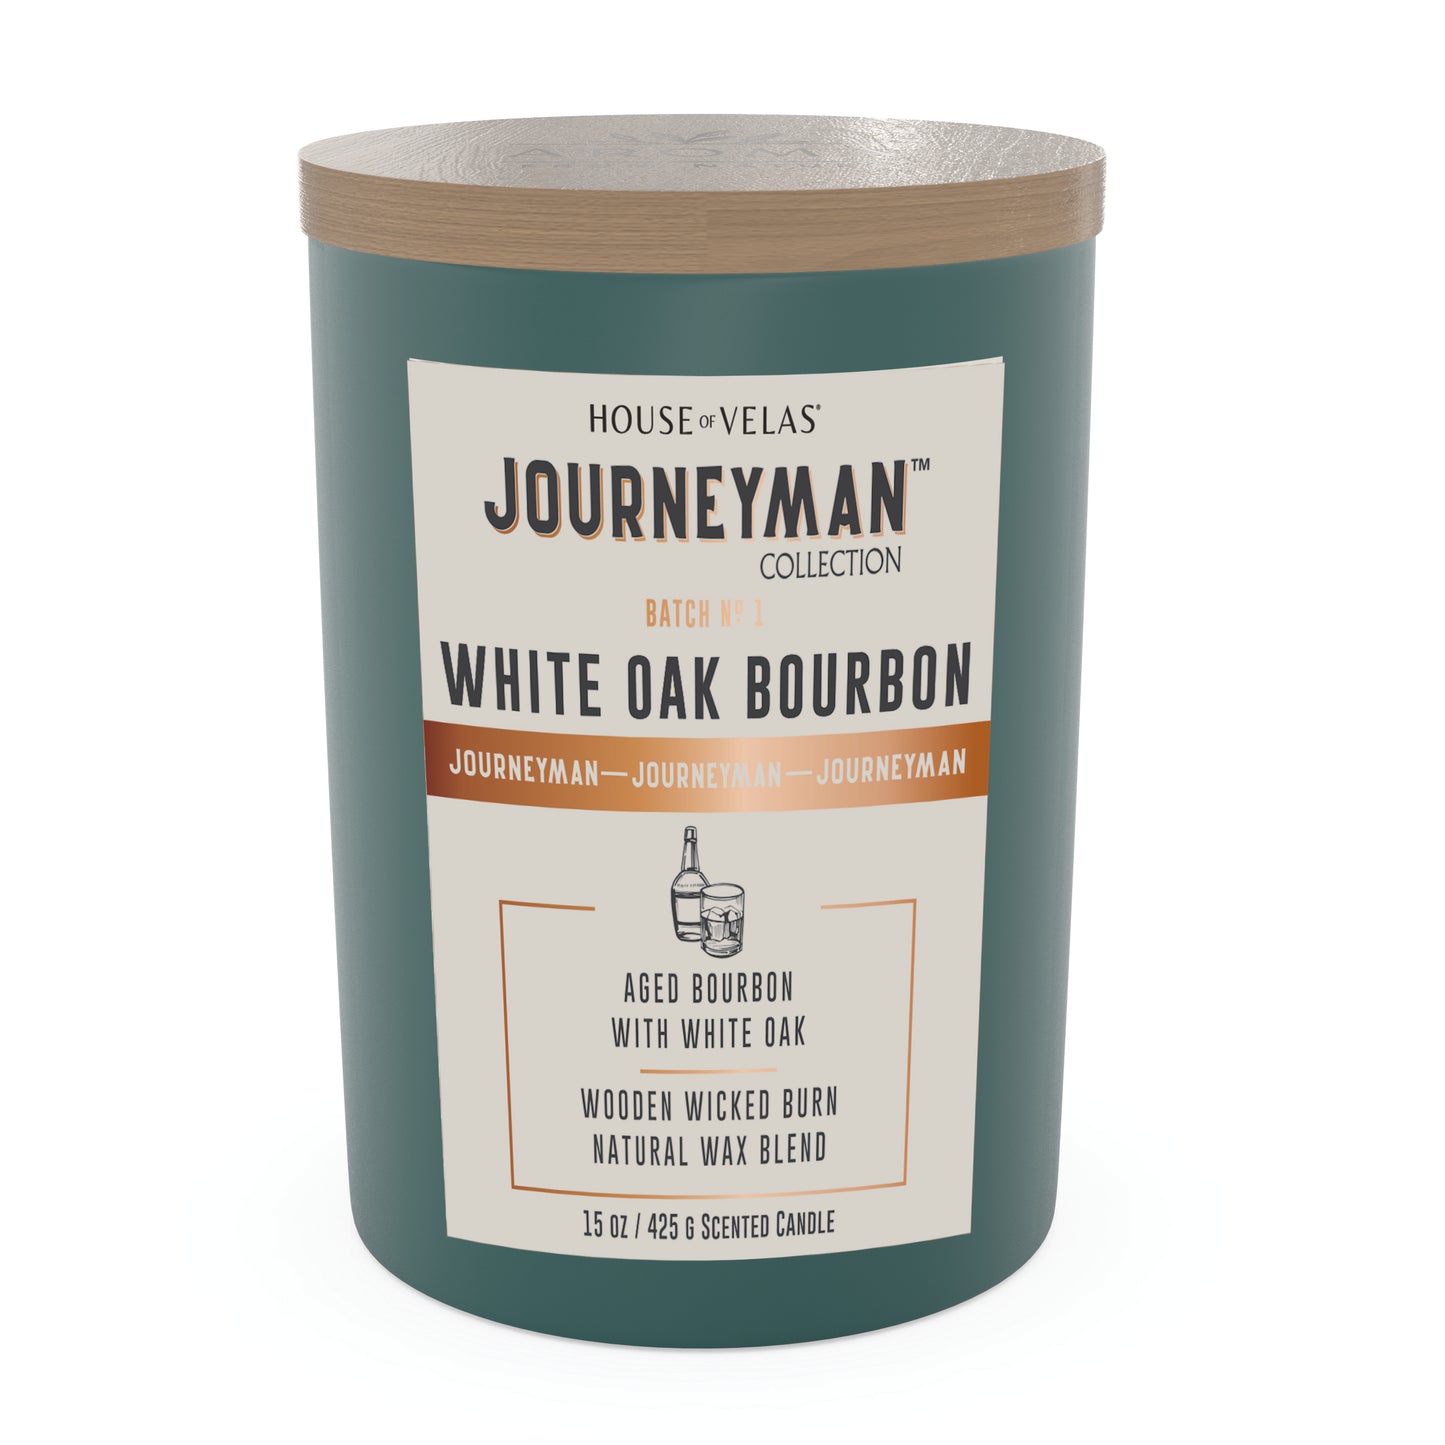 Journeyman by House of Velas - White Oak Bourbon Scented Candle, 15oz